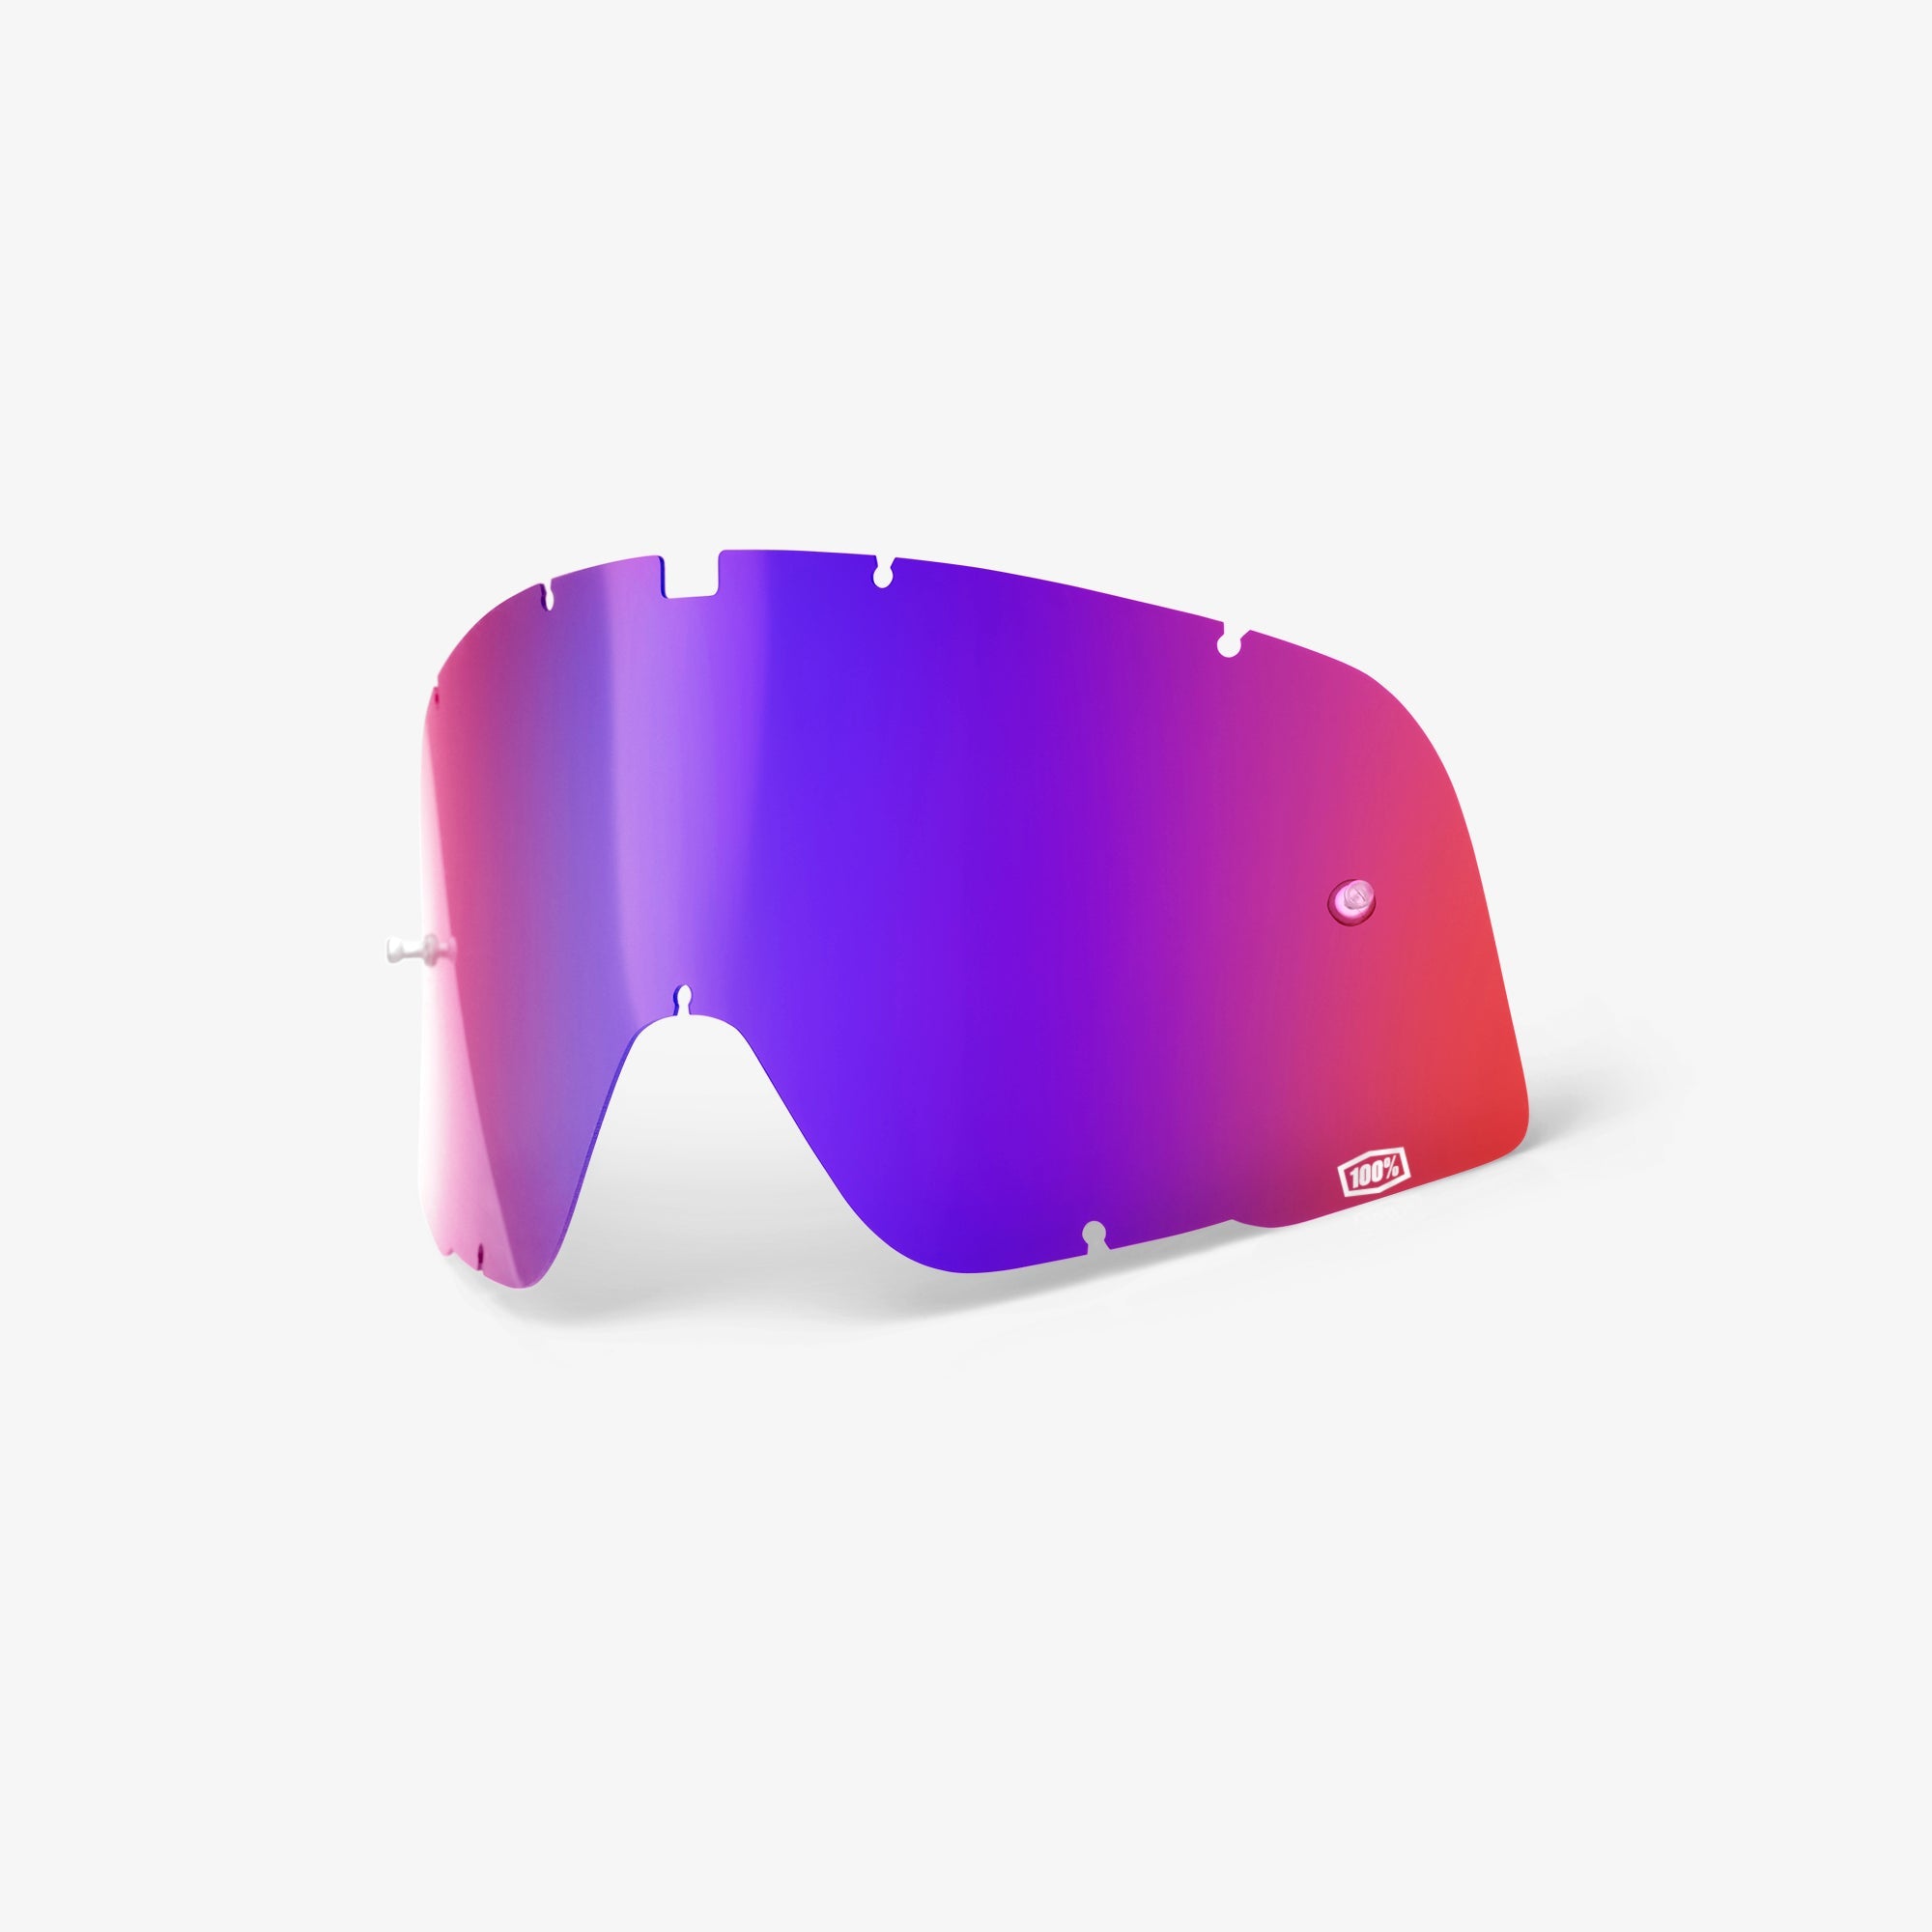 BARSTOW - Replacement Lens - Red/Blue Mirror